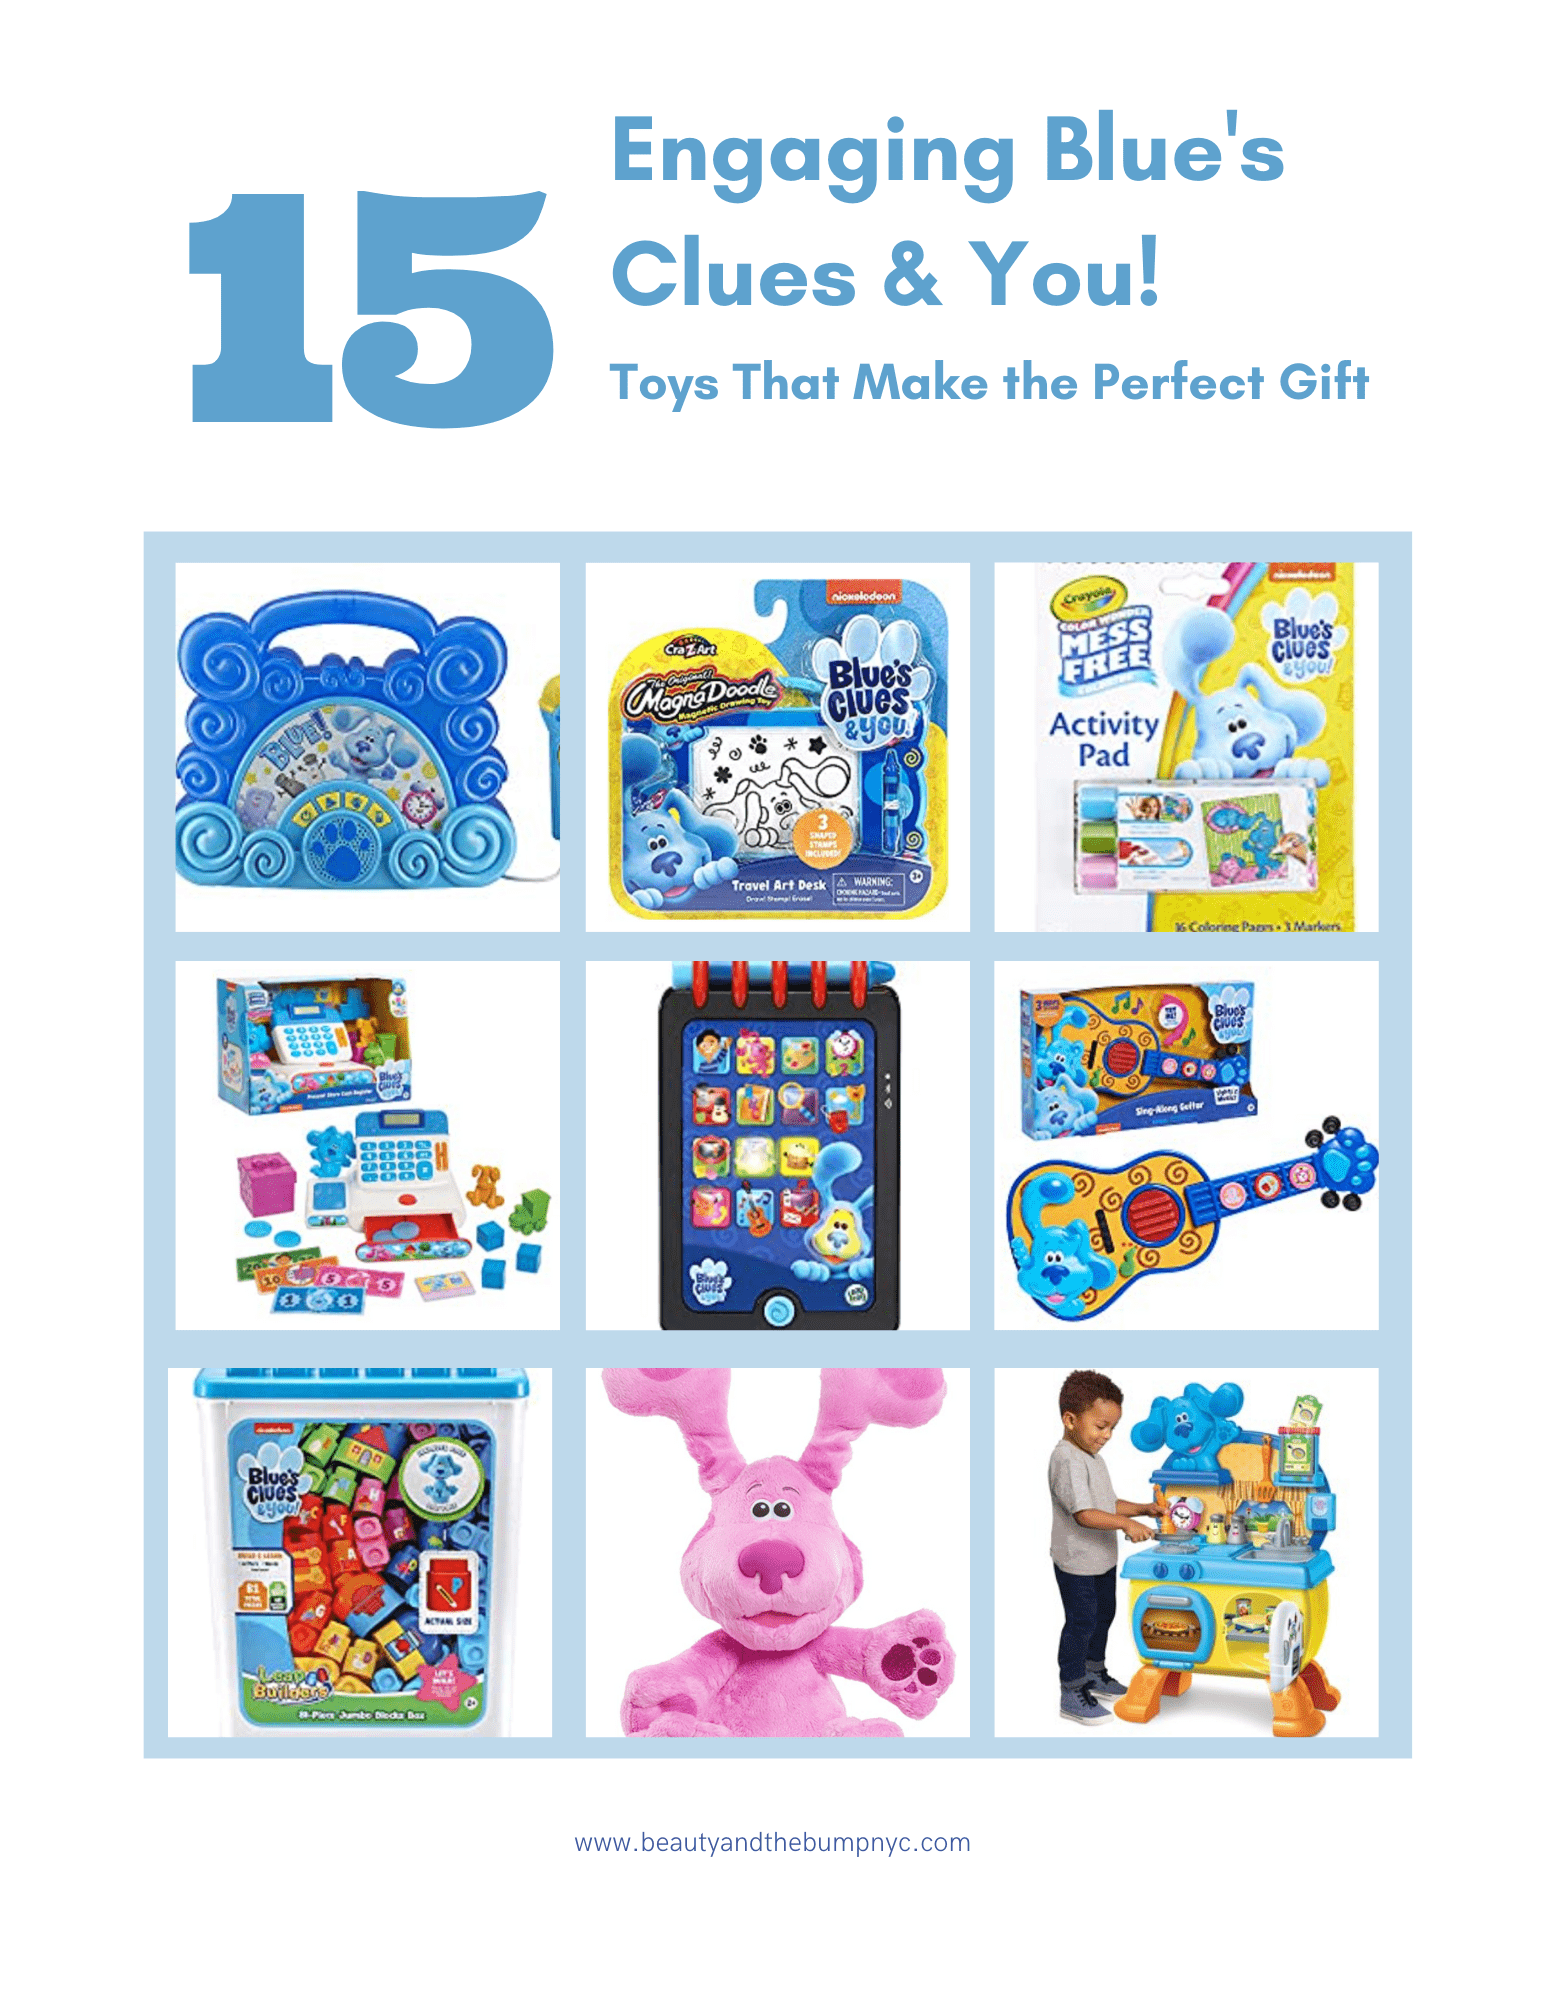 Blue's Clues & You is a household favorite among little ones. They'll enjoy playing with any of these Blue's Clues & You toys on this list.